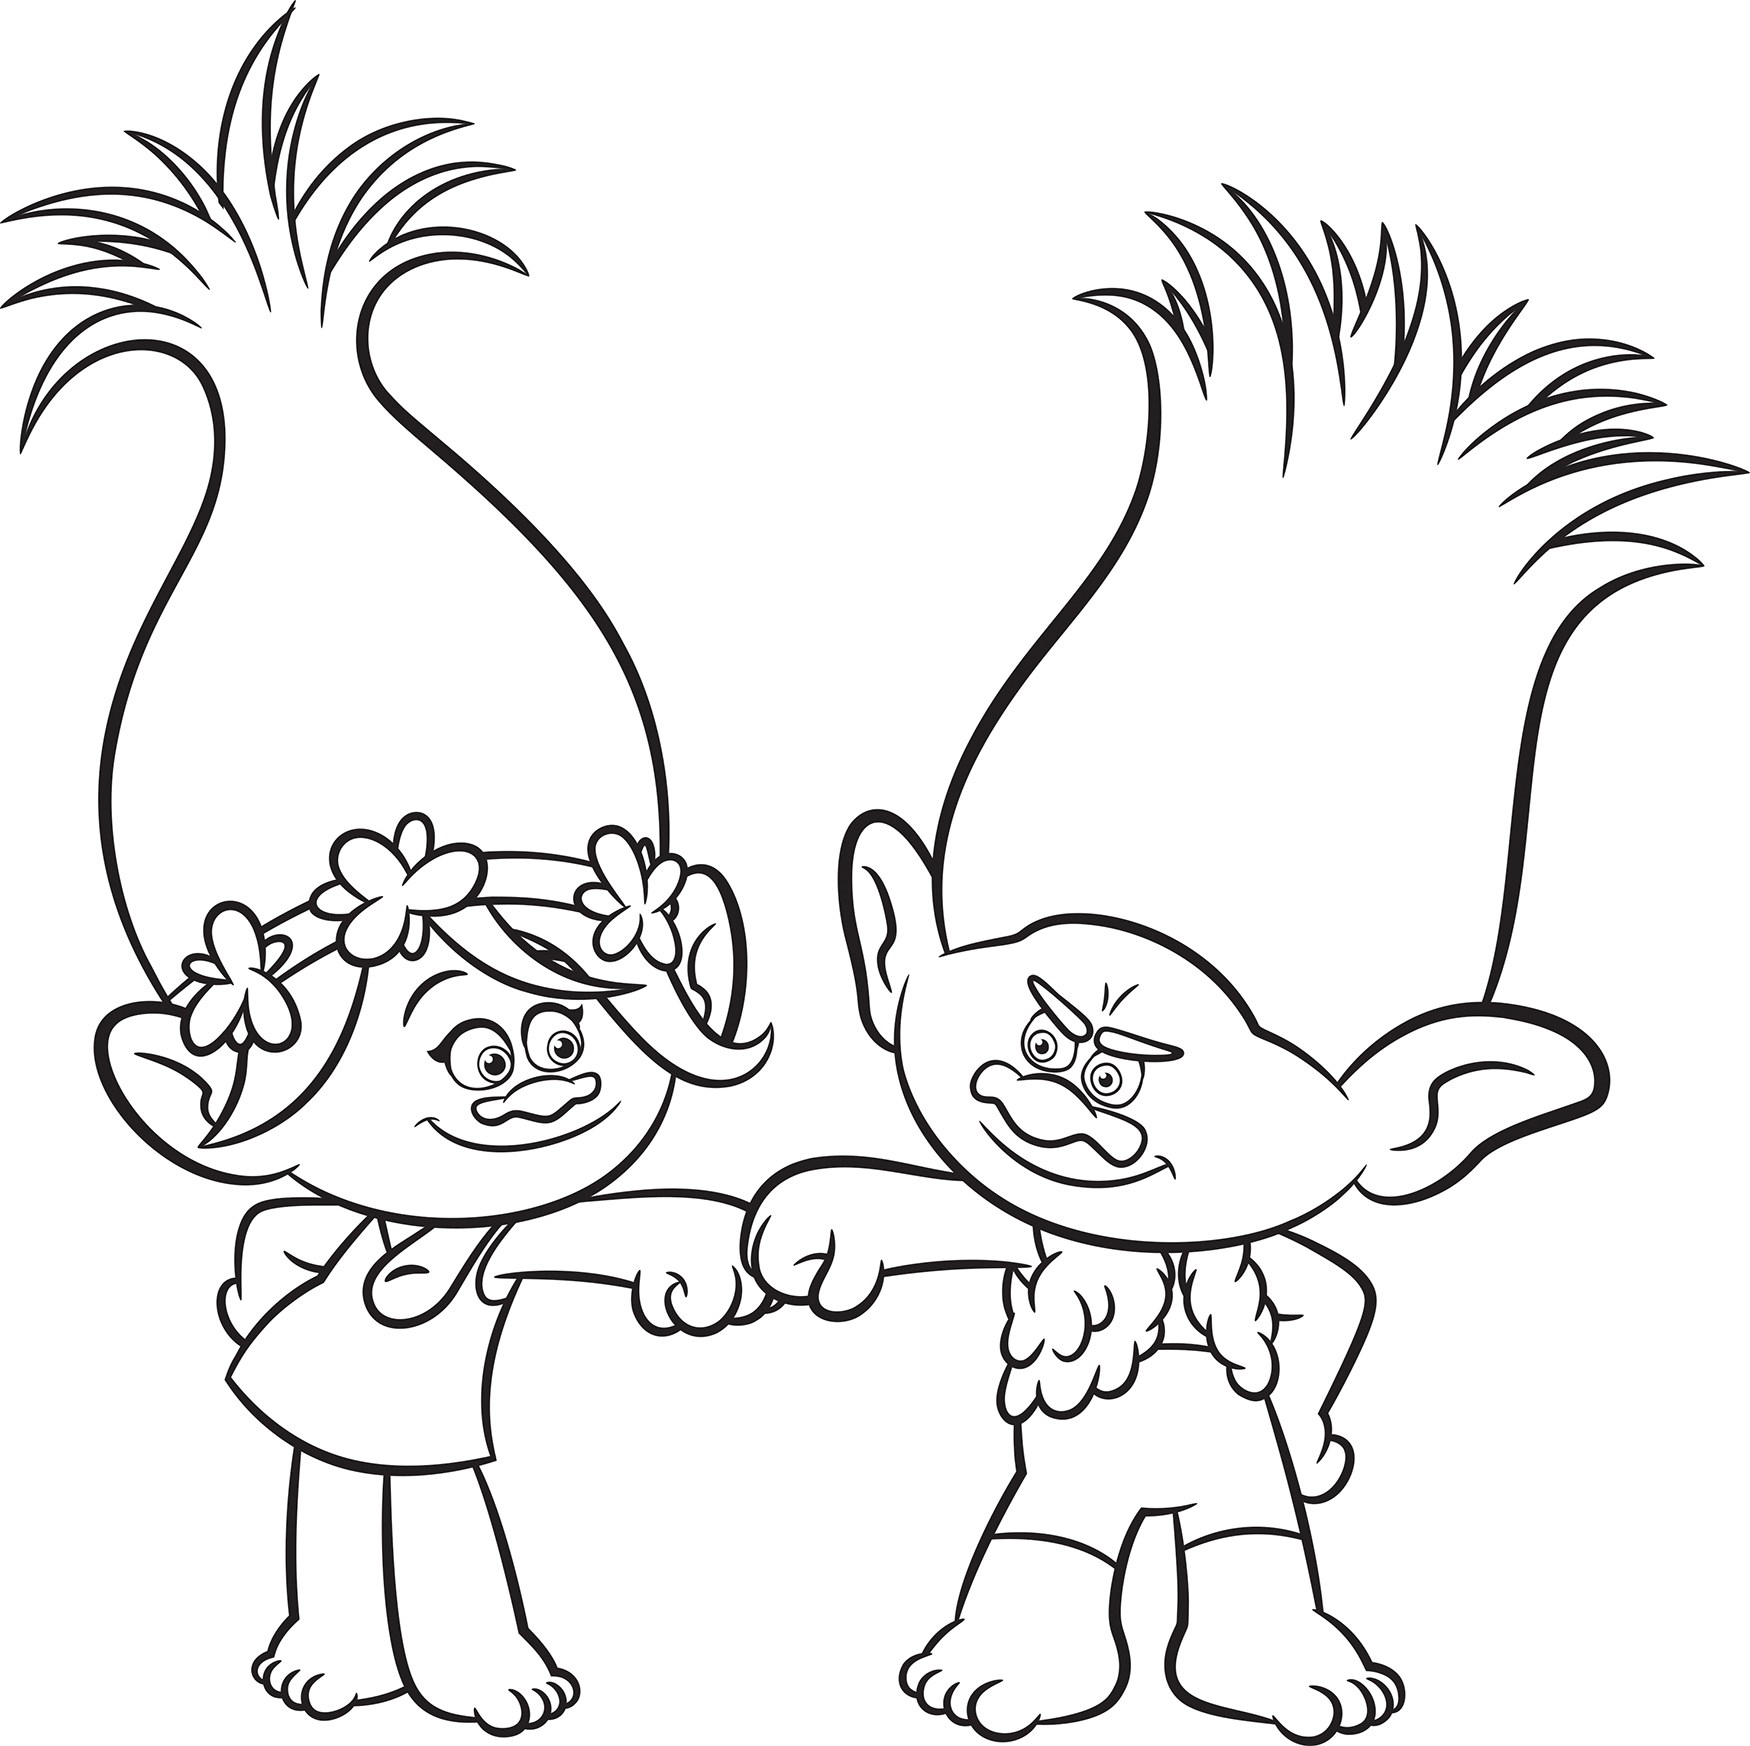 Poppy And Branch Smiling Coloring Page - Free Printable Coloring Pages